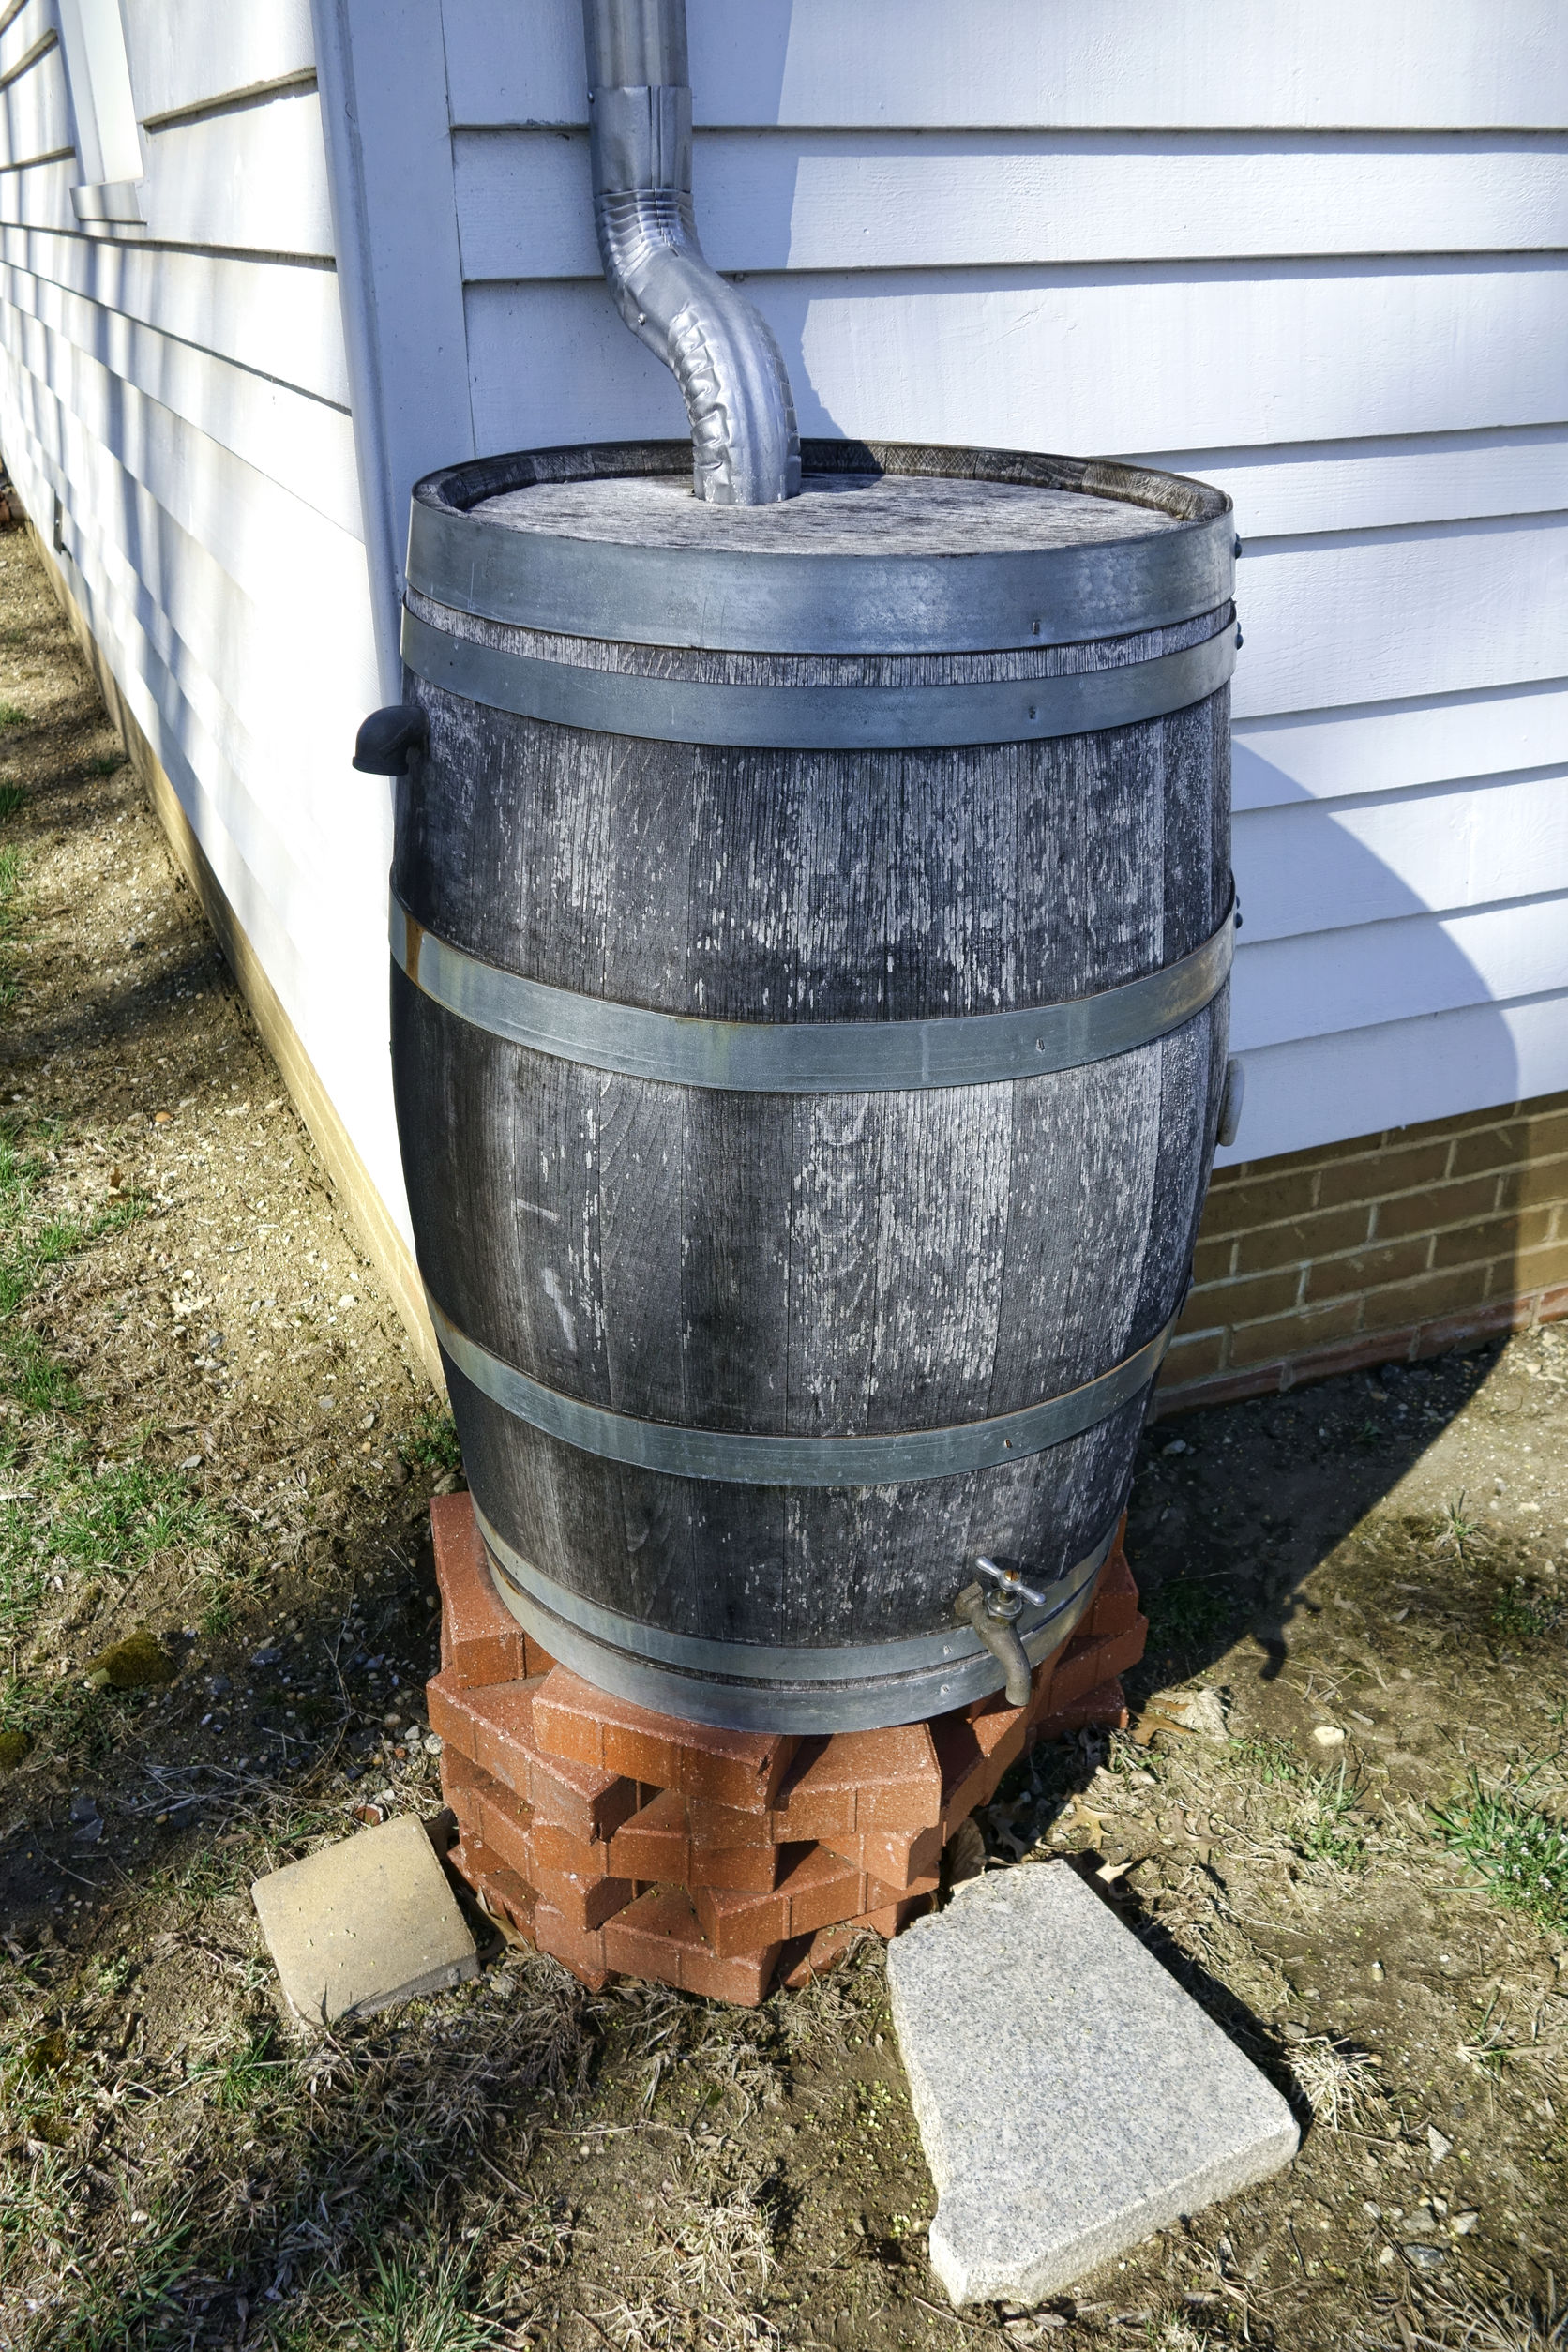 wood rainwater tank rain barrel for storm water runoff collection and recycling reuse with irrigation spigot at the corner of a rural house building